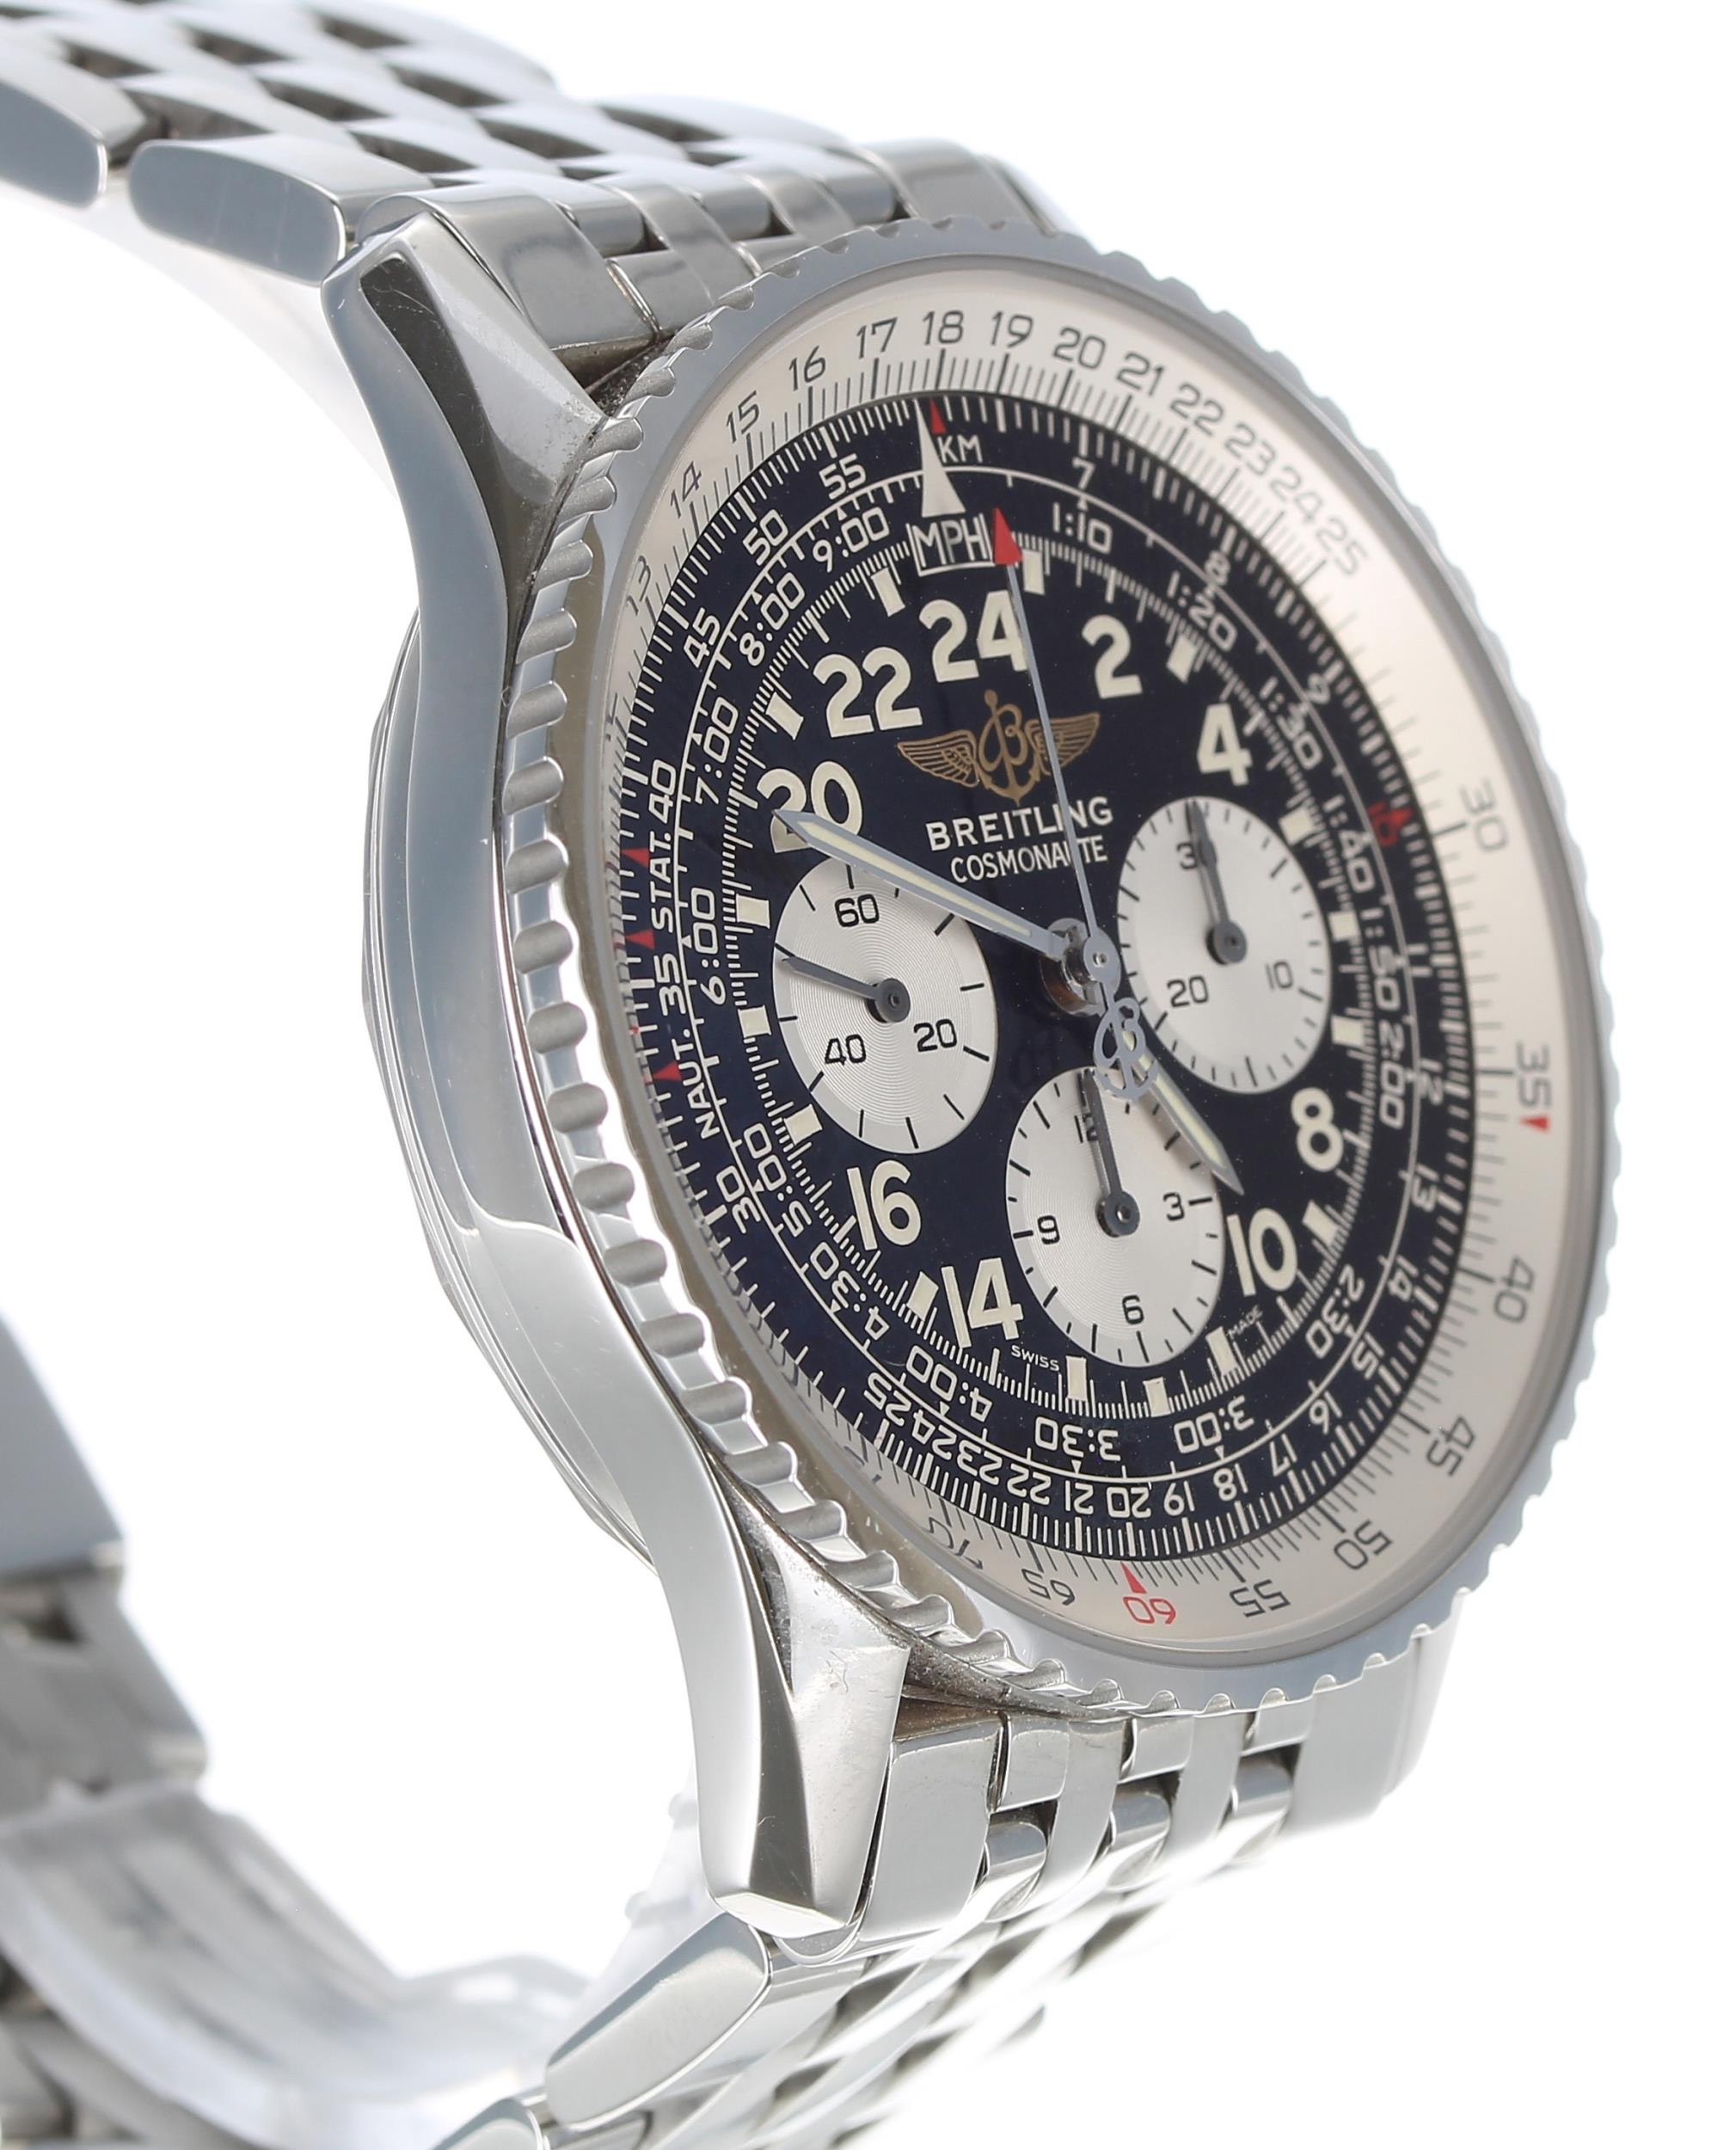 Breitling Cosmonaute chronograph stainless steel gentleman's wristwatch, reference no. A12322, - Image 4 of 6